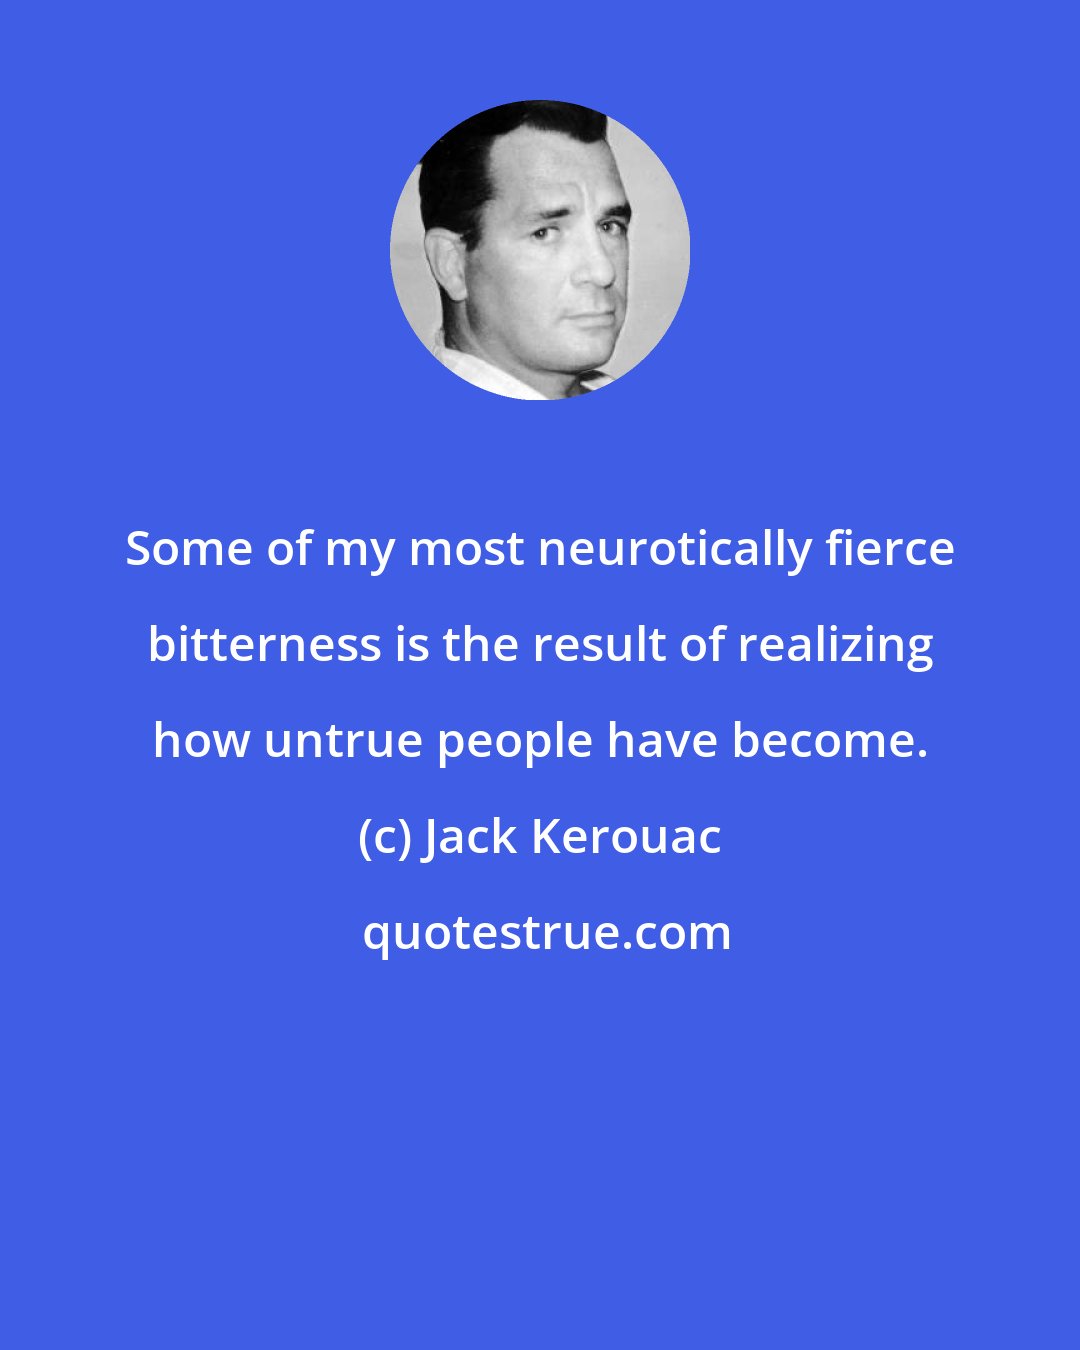 Jack Kerouac: Some of my most neurotically fierce bitterness is the result of realizing how untrue people have become.